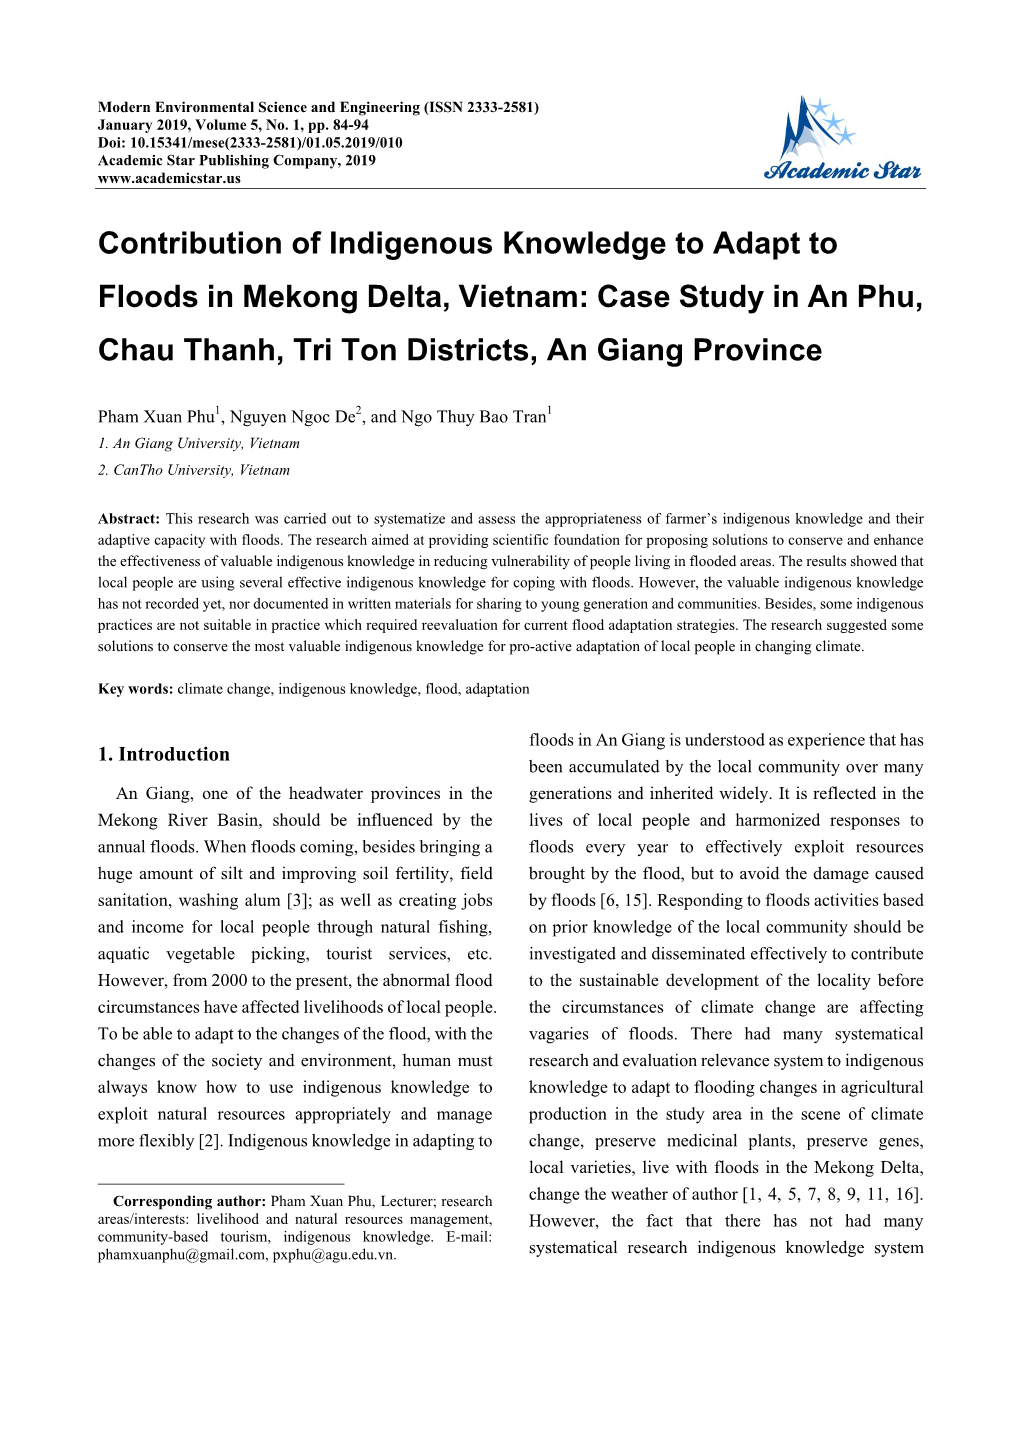 Contribution of Indigenous Knowledge to Adapt to Floods in Mekong Delta, Vietnam: Case Study in an Phu, Chau Thanh, Tri Ton Districts, an Giang Province